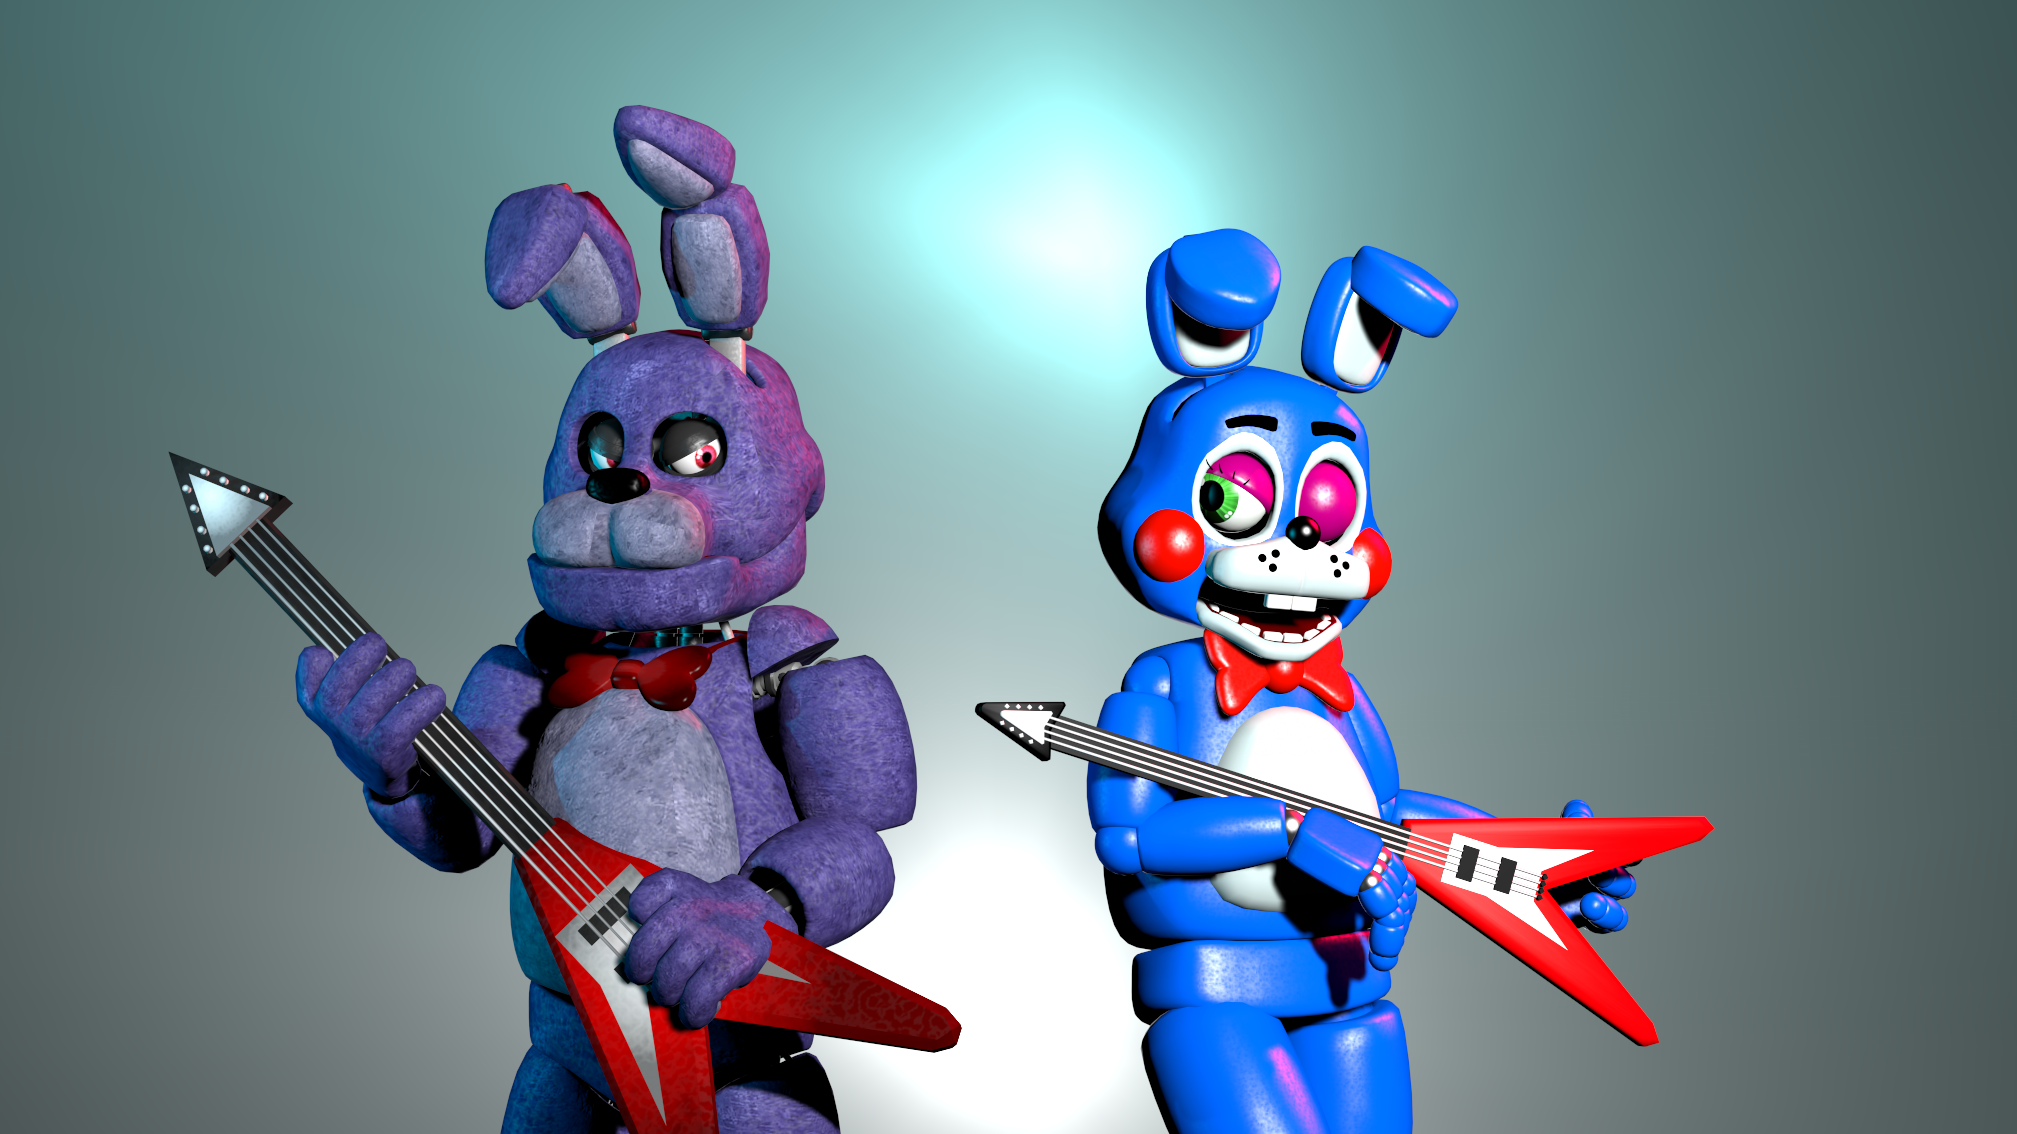 Bonnie from Toy Story in HSK Style by JayReganWright2005 on DeviantArt